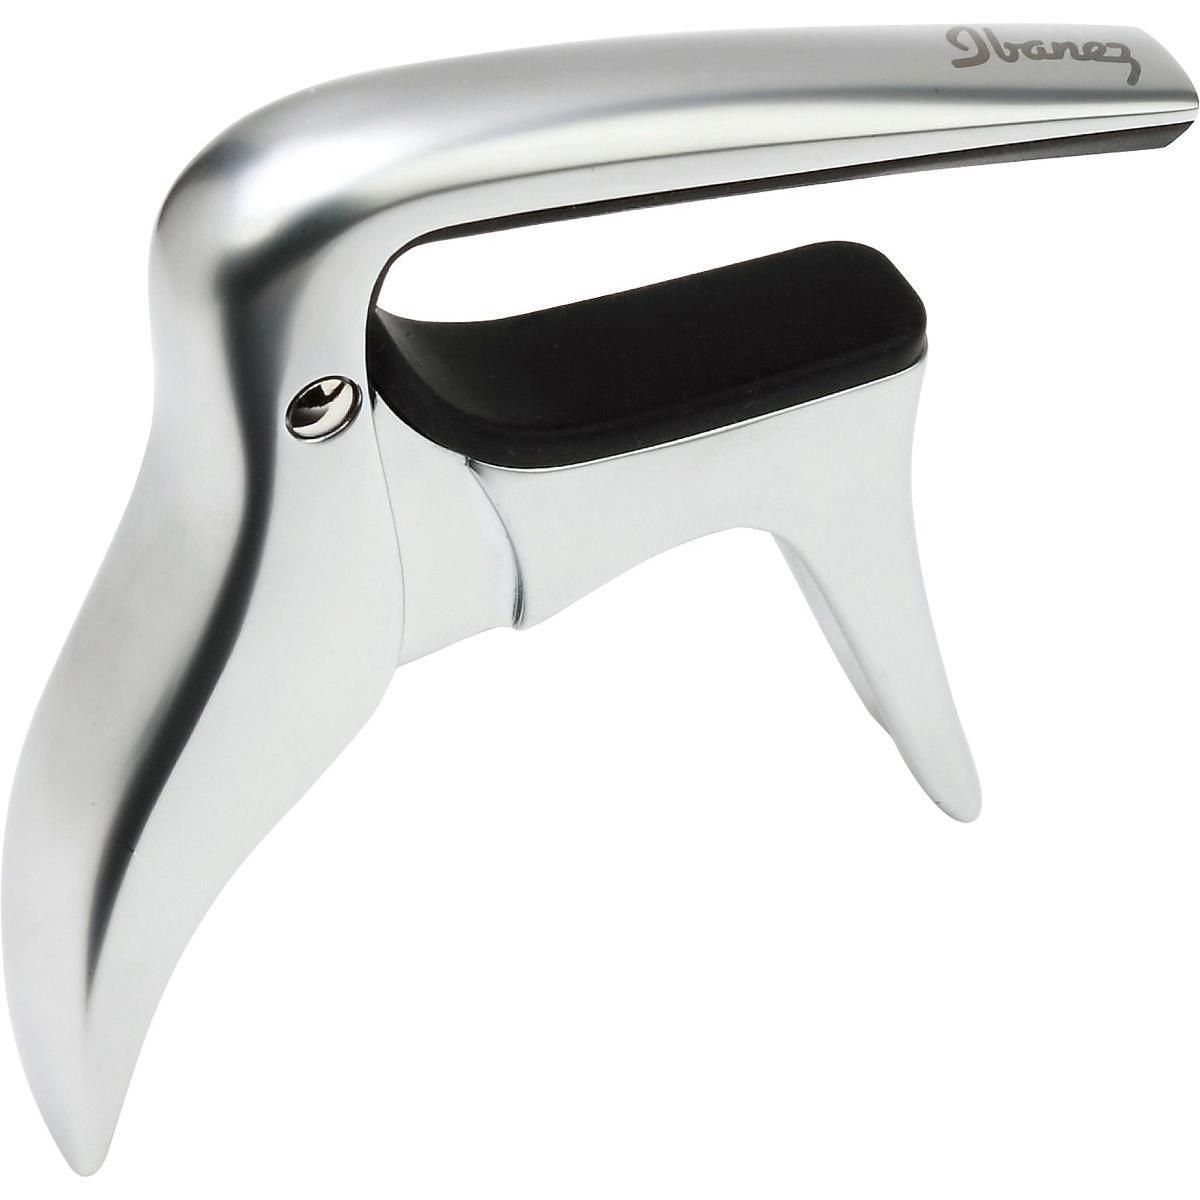 Ibanez Stainless Steel Capo for Acoustic and Electric Guitars, Silver -  IGC10